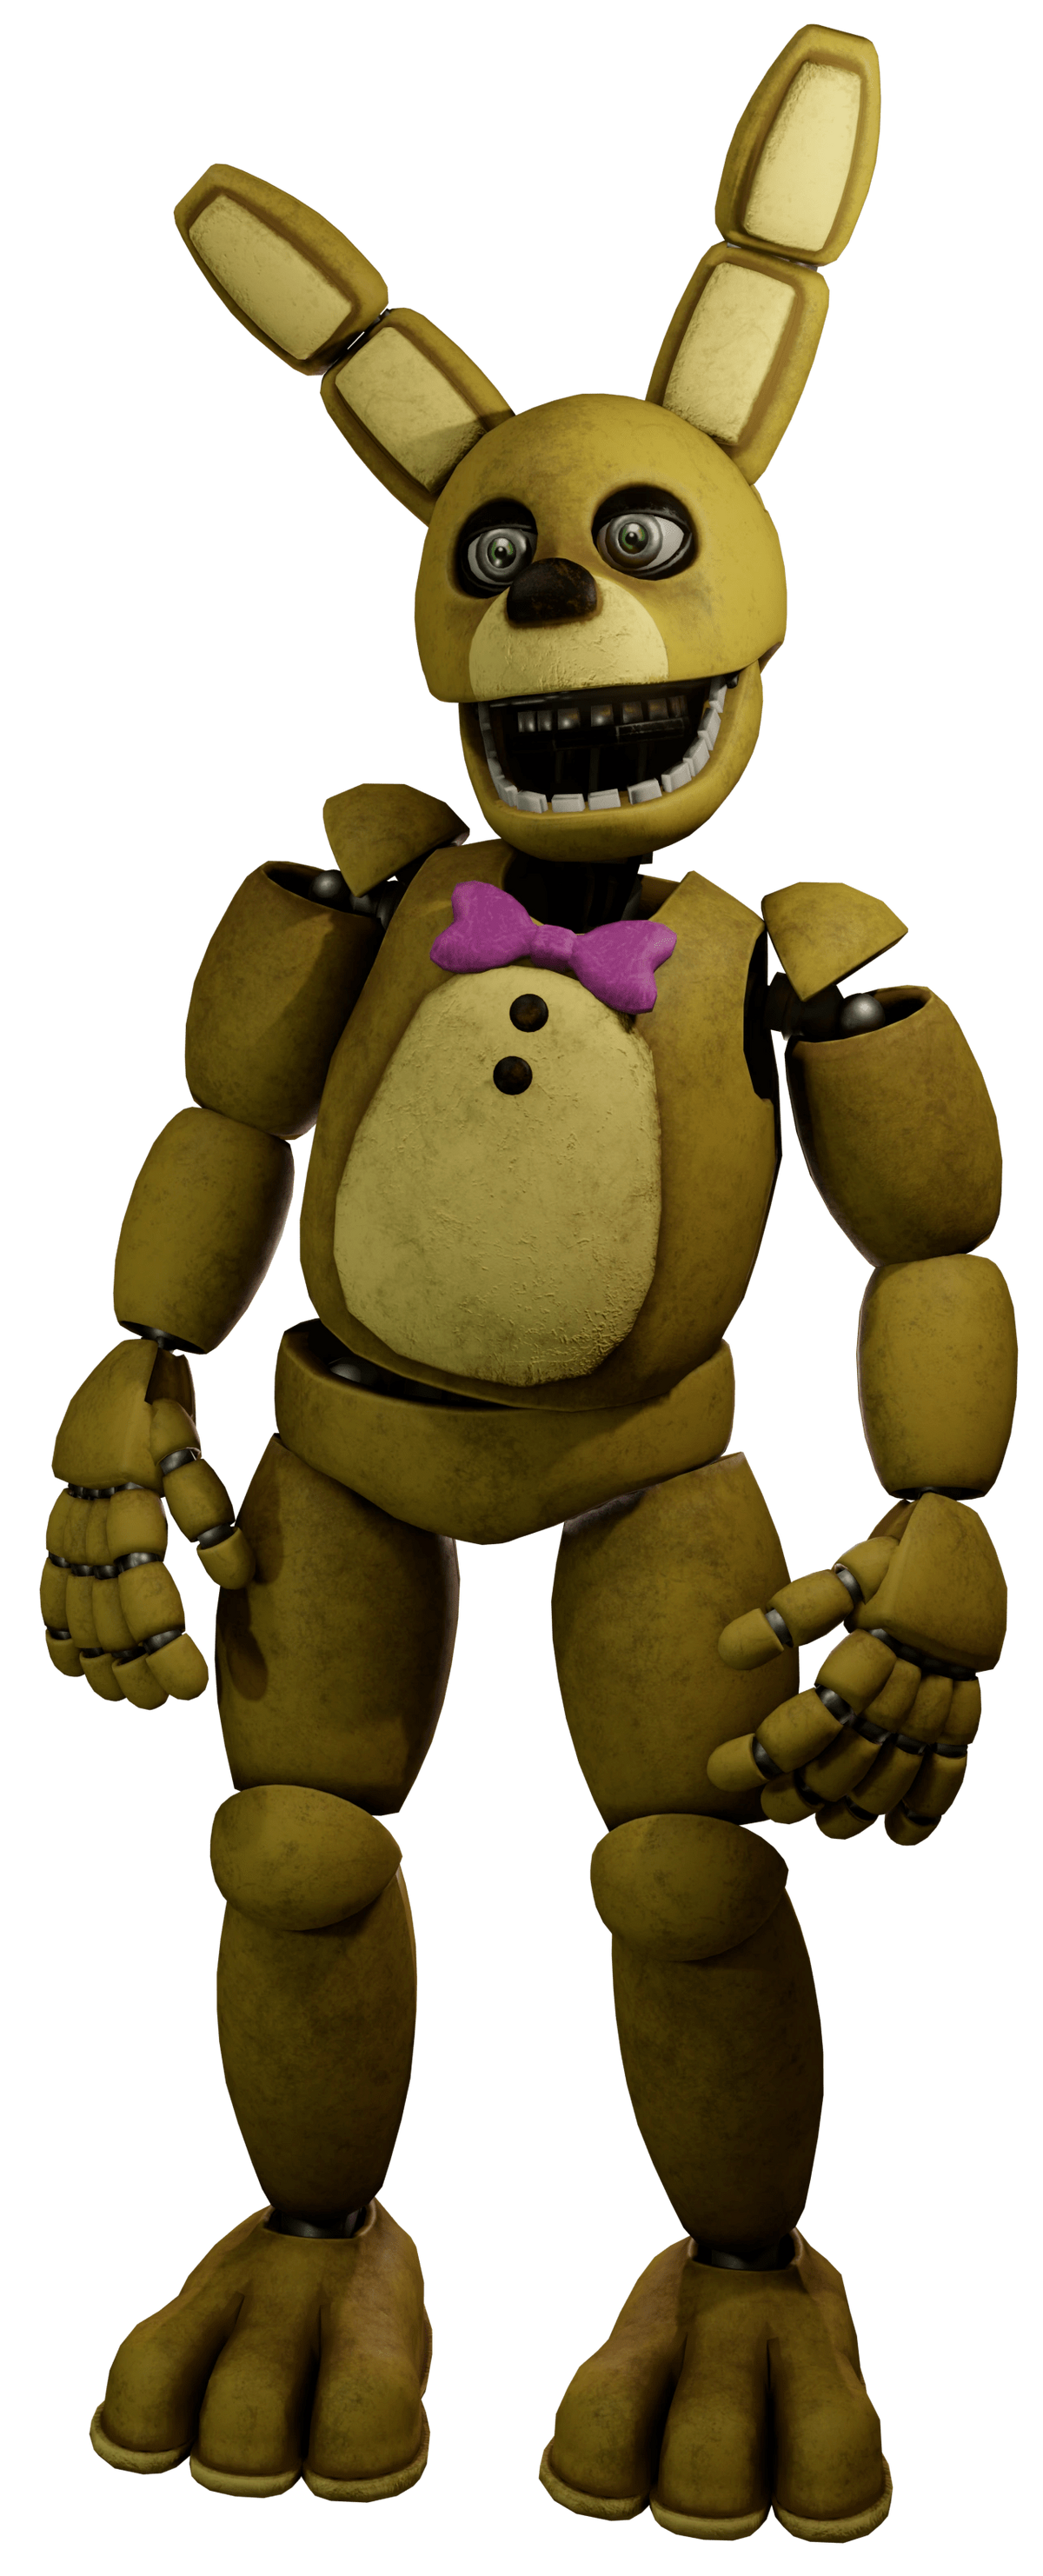 Nightmare Freddy Fan Casting for Five Nights At Freddy's 4: The Movie